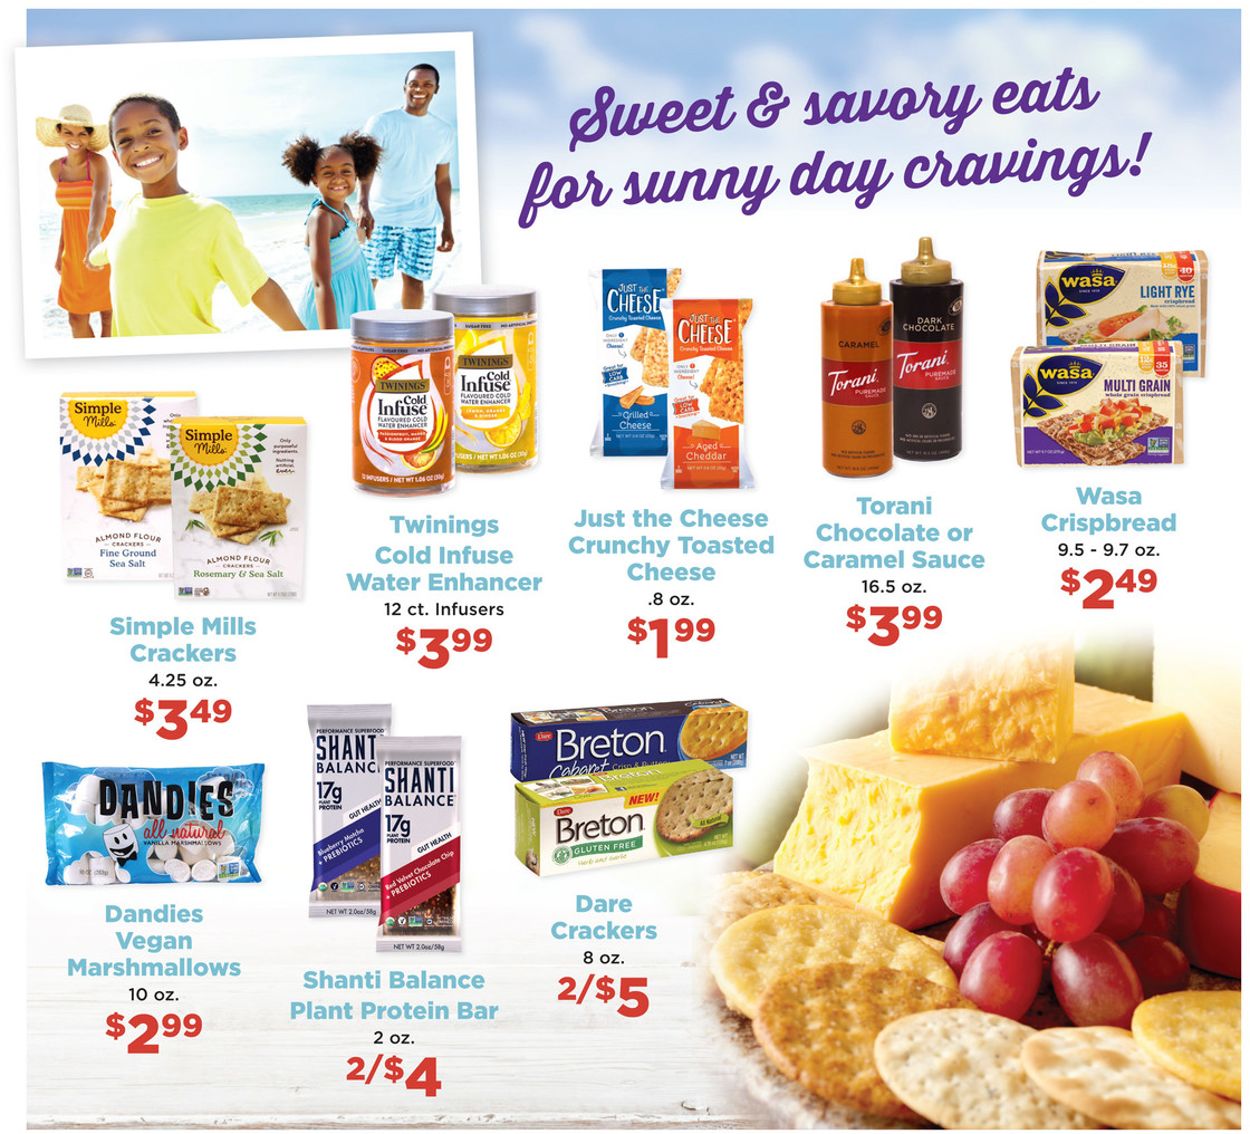 Family Fare Ad from 06/27/2021